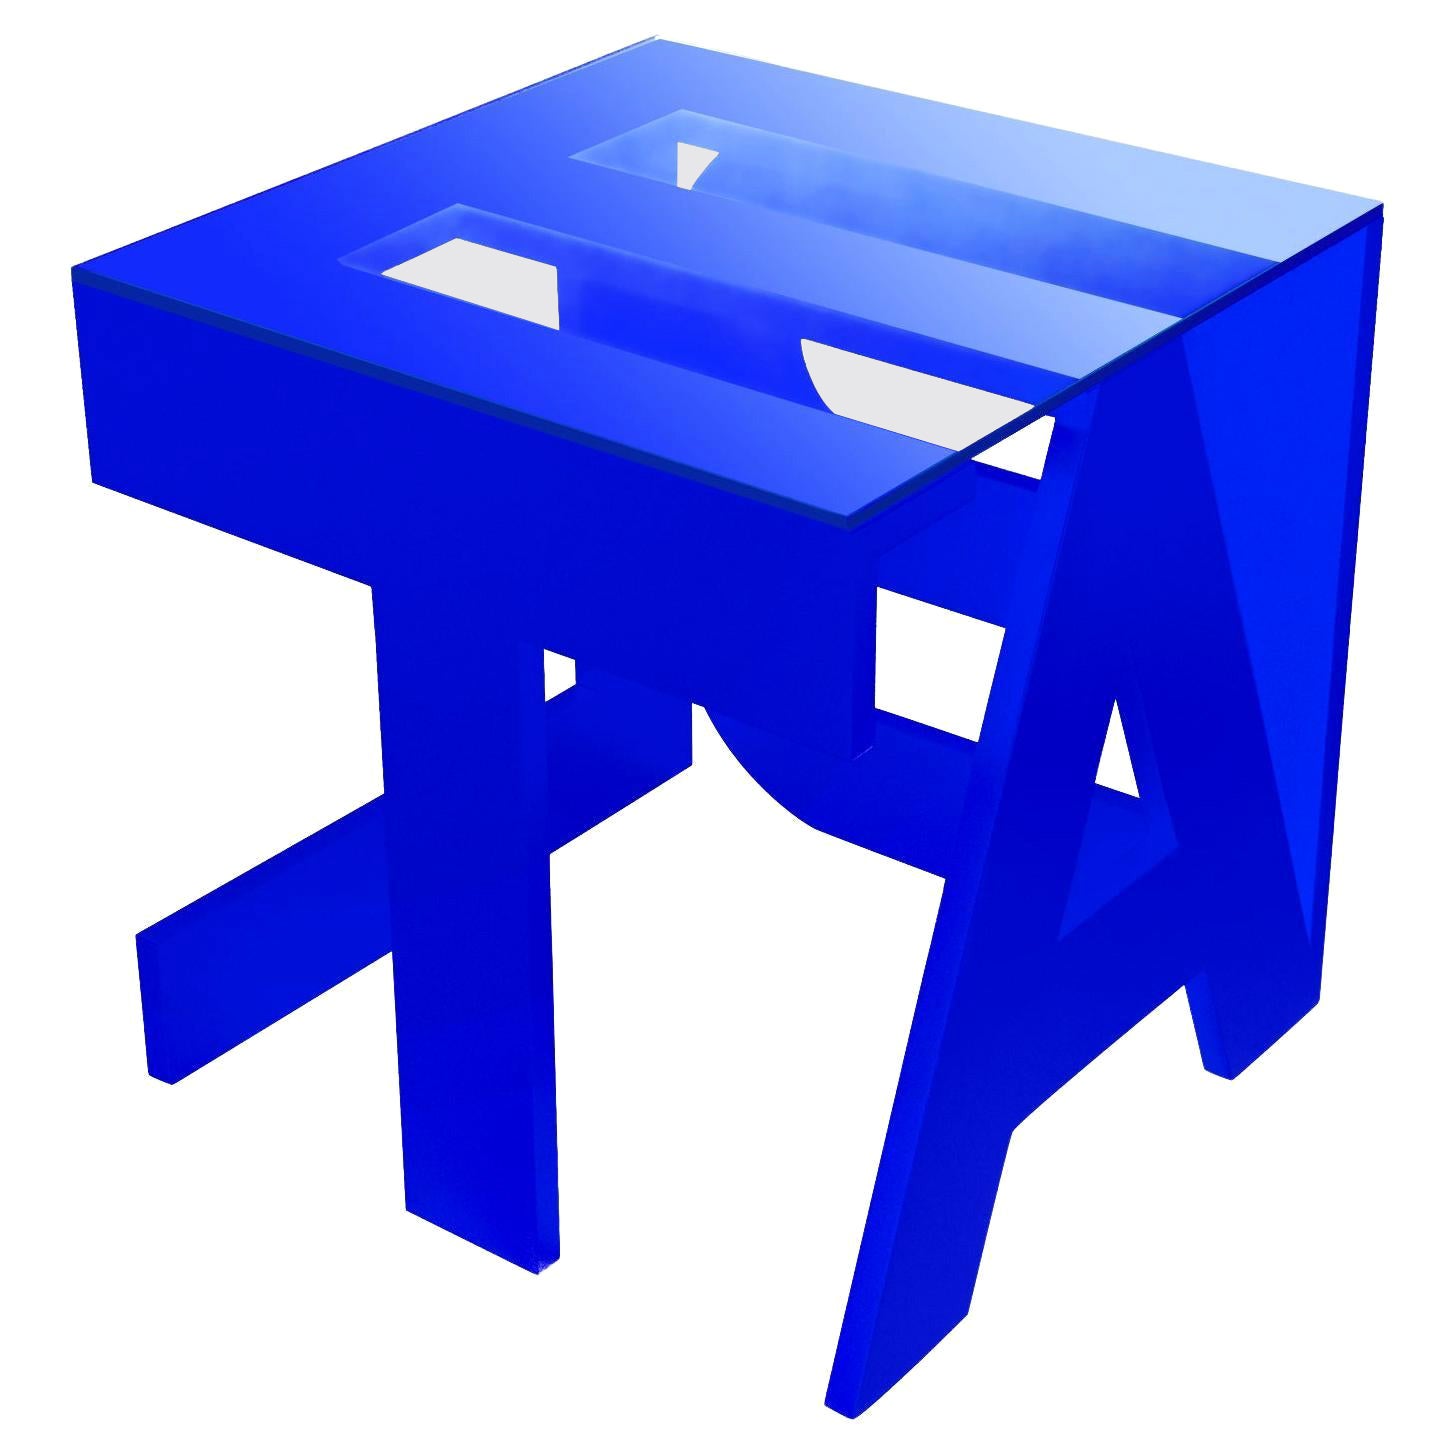 Blue "Table" Table by Roberta Rampazzo For Sale